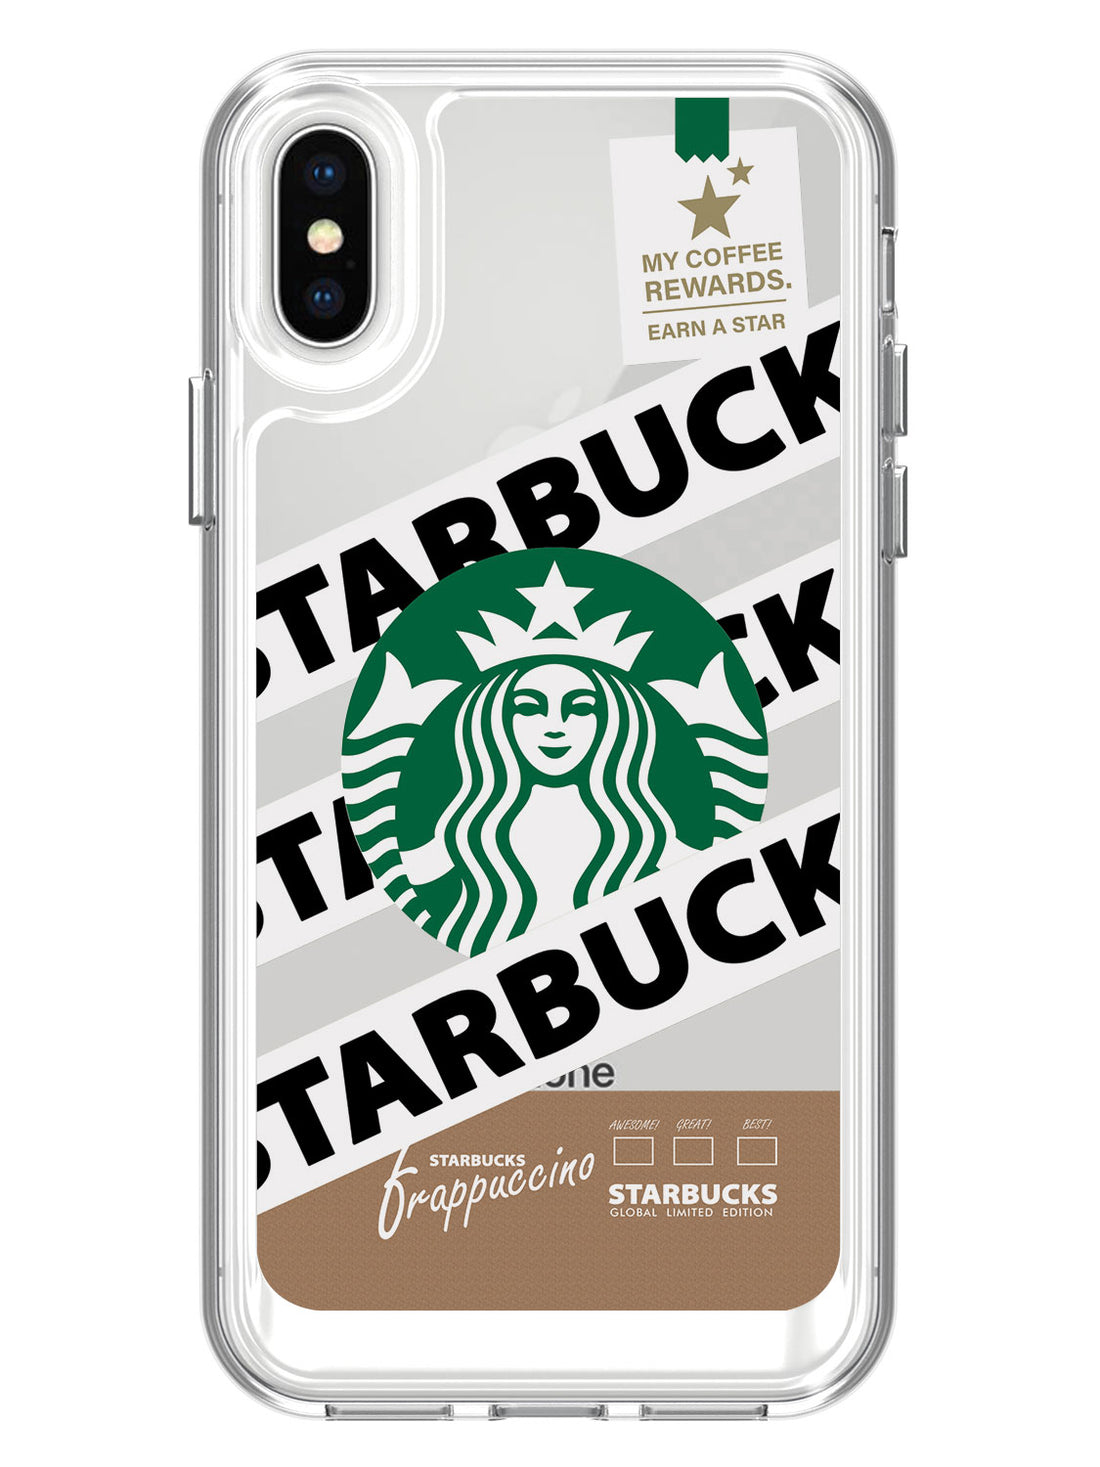 iphone x case , iphone x cover online , iphone x cover for girls stylish